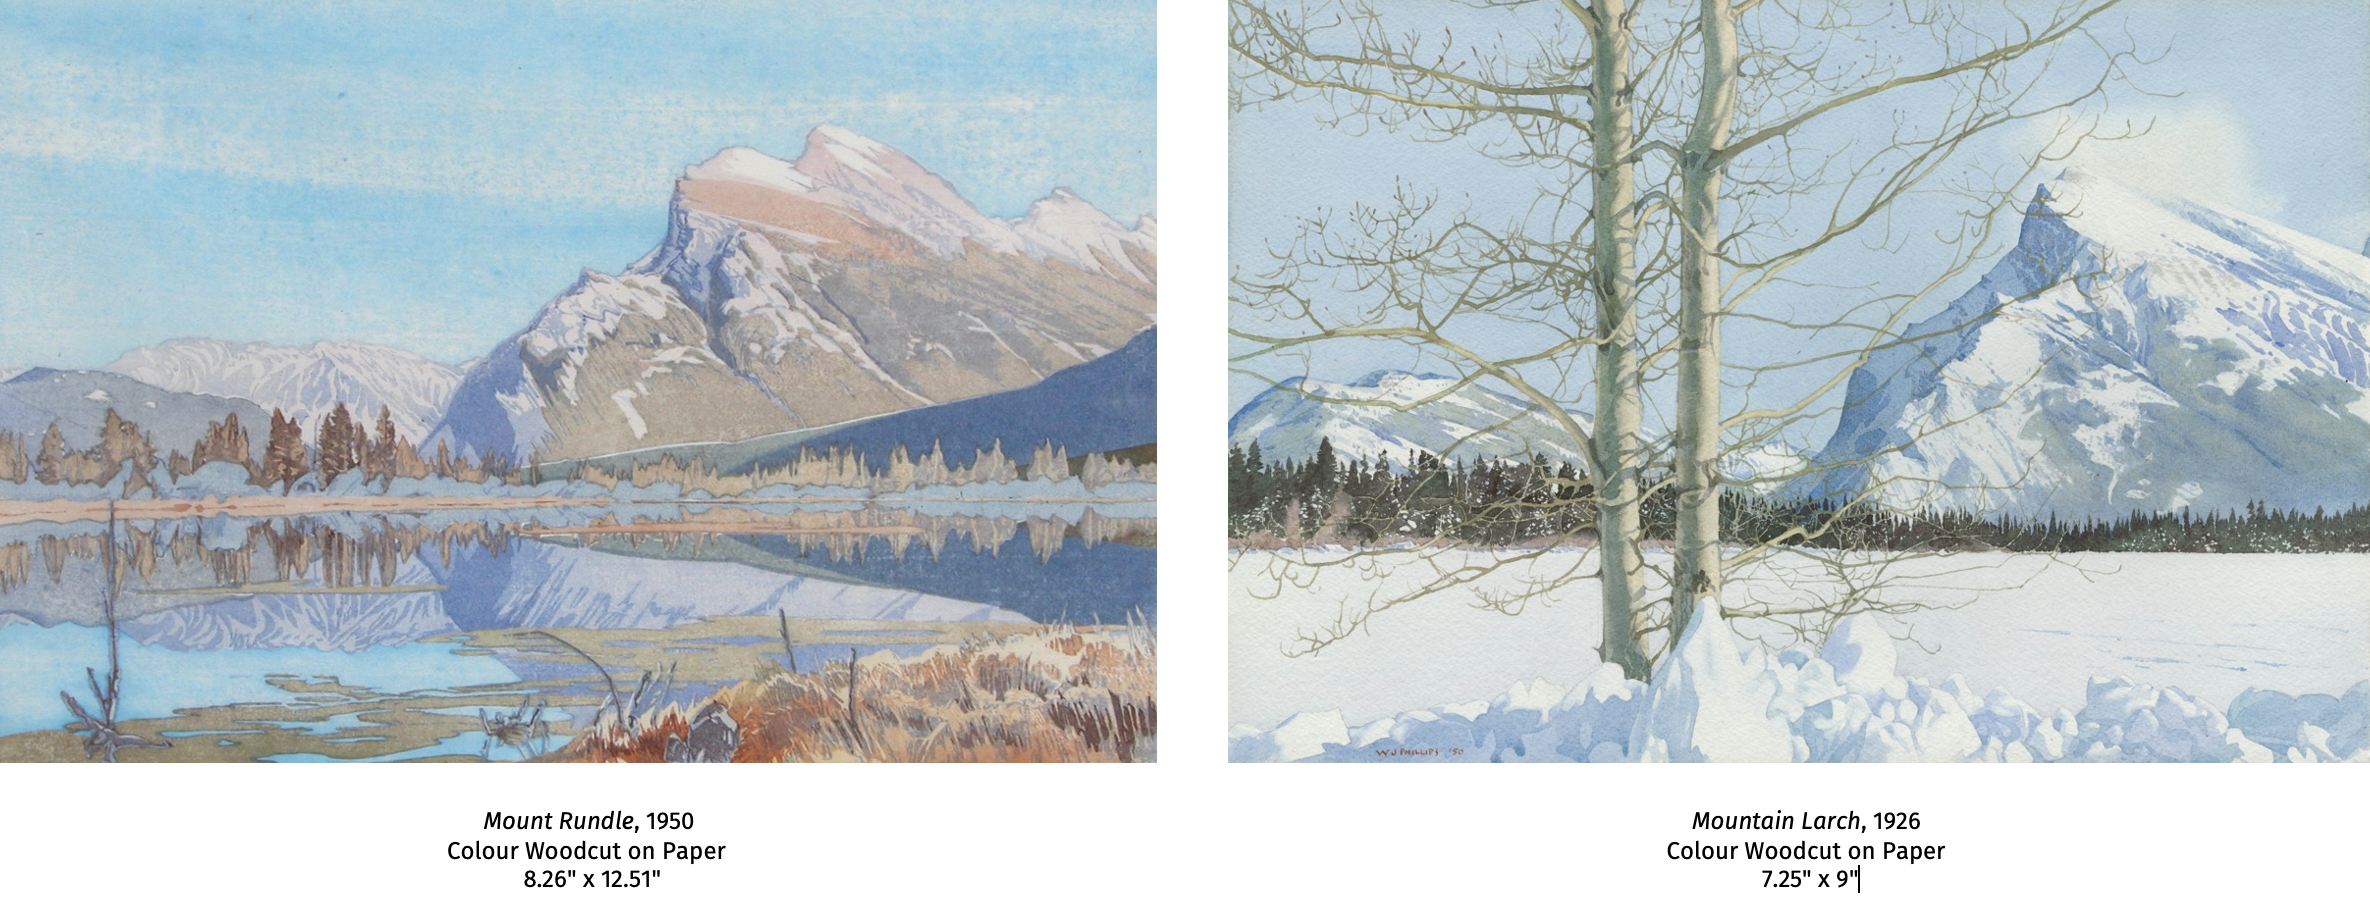 Two artworks depicting Mount Rundle, one is in summer with a reflecting lake, the second shows two poplar trees in front of the snow covered mountain landscape